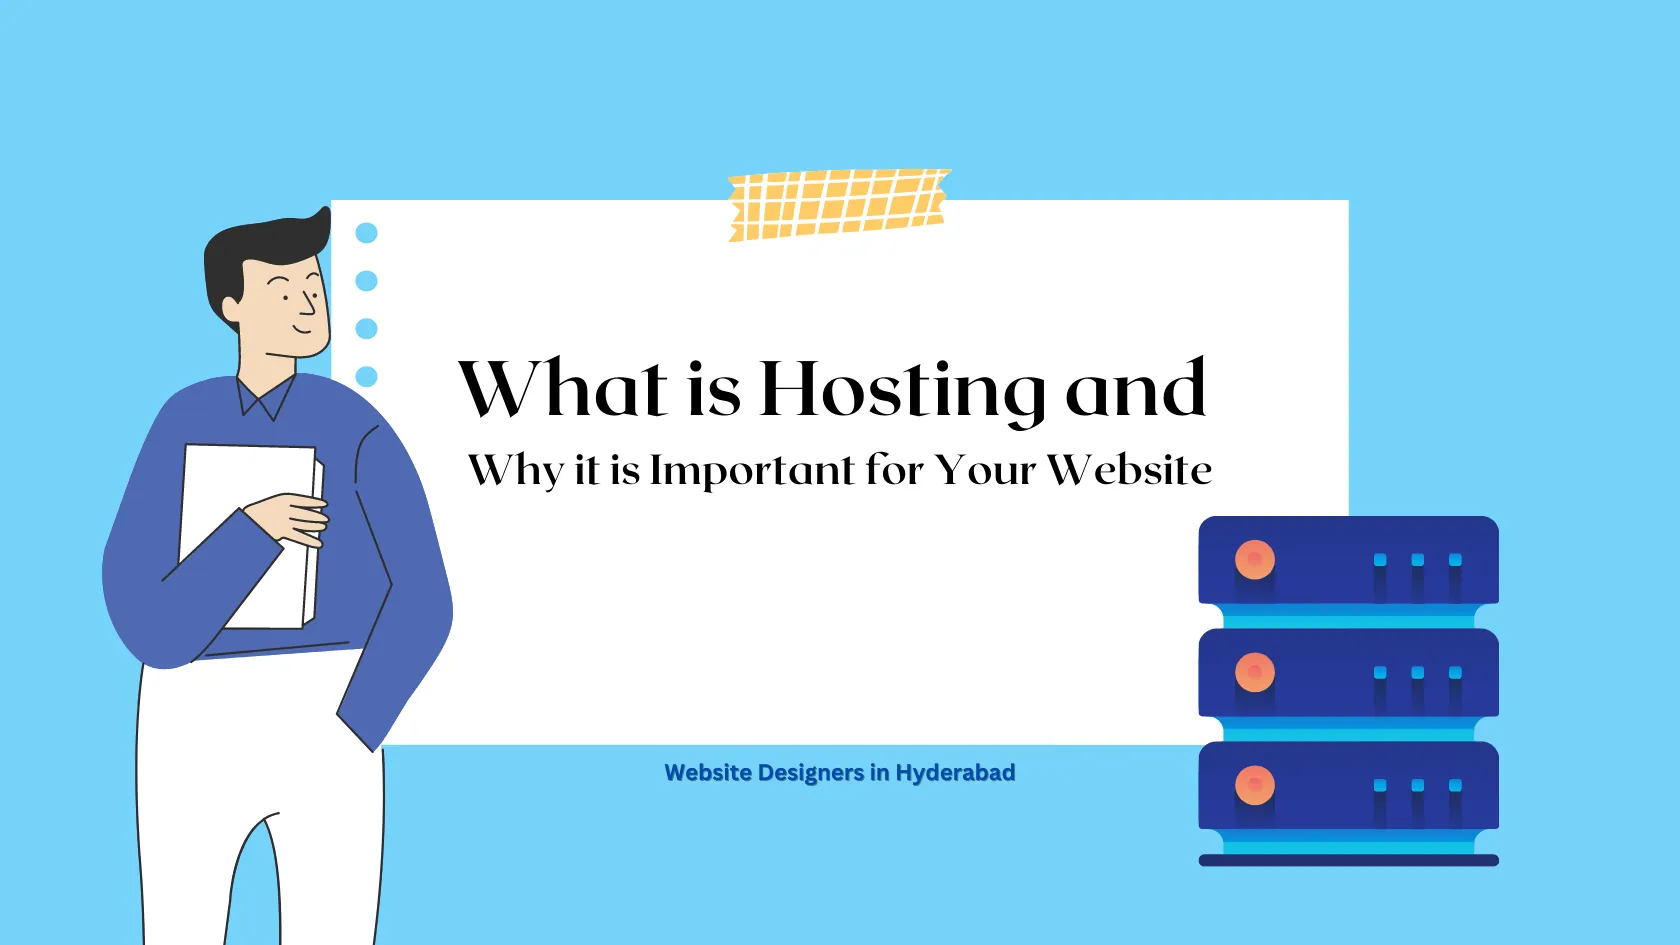 What is Hosting and Why it is Important for Your Website